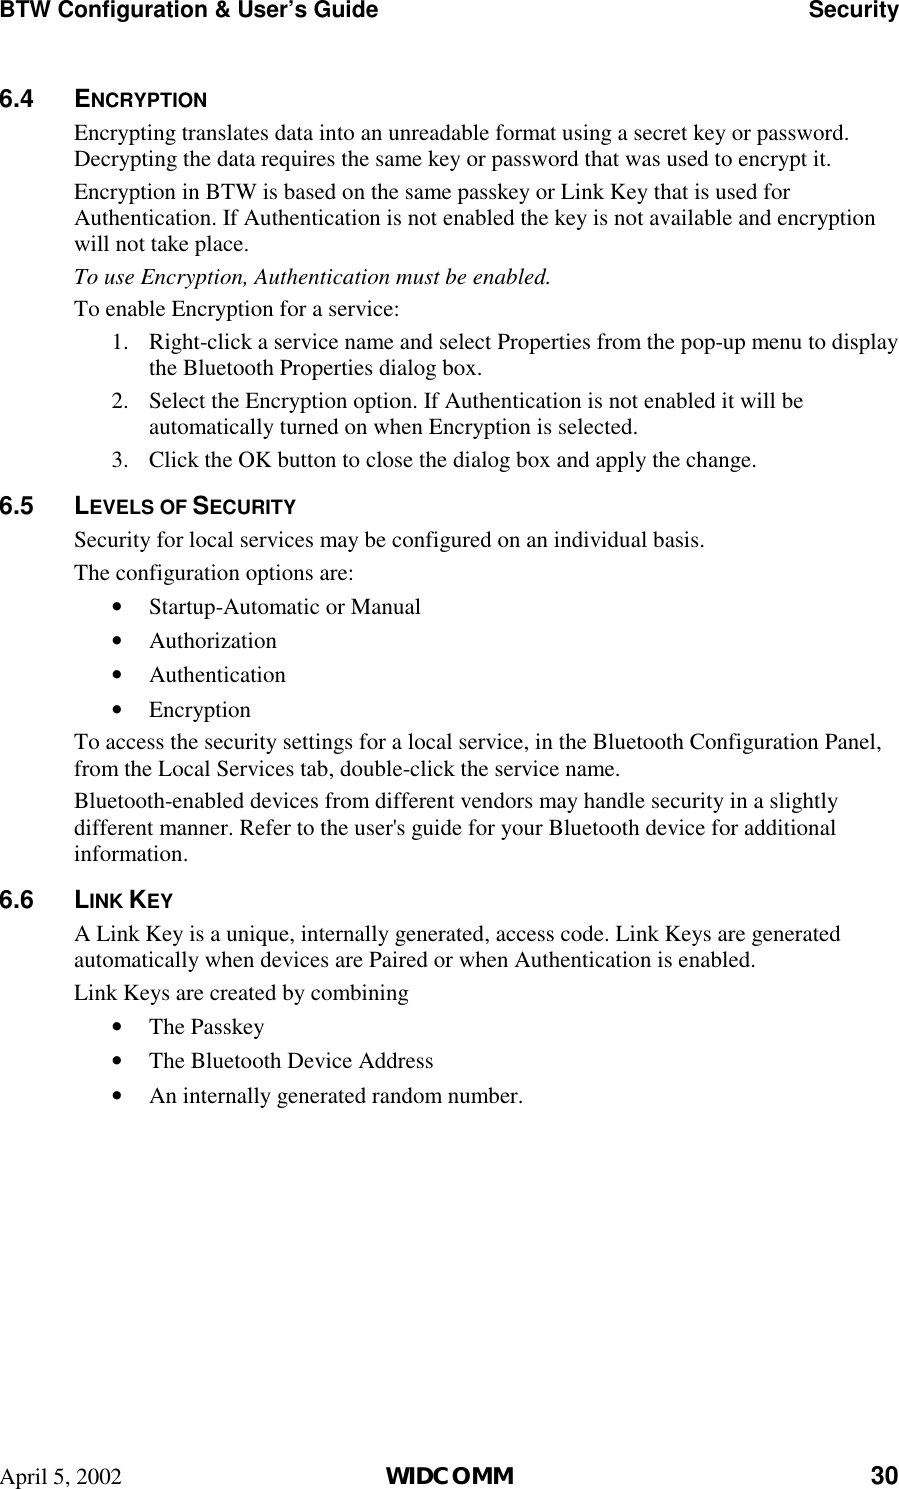 BTW Configuration &amp; User’s Guide    Security April 5, 2002  WIDCOMM 30 6.4 ENCRYPTION Encrypting translates data into an unreadable format using a secret key or password. Decrypting the data requires the same key or password that was used to encrypt it. Encryption in BTW is based on the same passkey or Link Key that is used for Authentication. If Authentication is not enabled the key is not available and encryption will not take place. To use Encryption, Authentication must be enabled.  To enable Encryption for a service: 1.  Right-click a service name and select Properties from the pop-up menu to display the Bluetooth Properties dialog box. 2.  Select the Encryption option. If Authentication is not enabled it will be automatically turned on when Encryption is selected. 3.  Click the OK button to close the dialog box and apply the change. 6.5 LEVELS OF SECURITY Security for local services may be configured on an individual basis.  The configuration options are: •  Startup-Automatic or Manual •  Authorization •  Authentication •  Encryption To access the security settings for a local service, in the Bluetooth Configuration Panel, from the Local Services tab, double-click the service name. Bluetooth-enabled devices from different vendors may handle security in a slightly different manner. Refer to the user&apos;s guide for your Bluetooth device for additional information. 6.6 LINK KEY A Link Key is a unique, internally generated, access code. Link Keys are generated automatically when devices are Paired or when Authentication is enabled. Link Keys are created by combining •  The Passkey •  The Bluetooth Device Address •  An internally generated random number.   